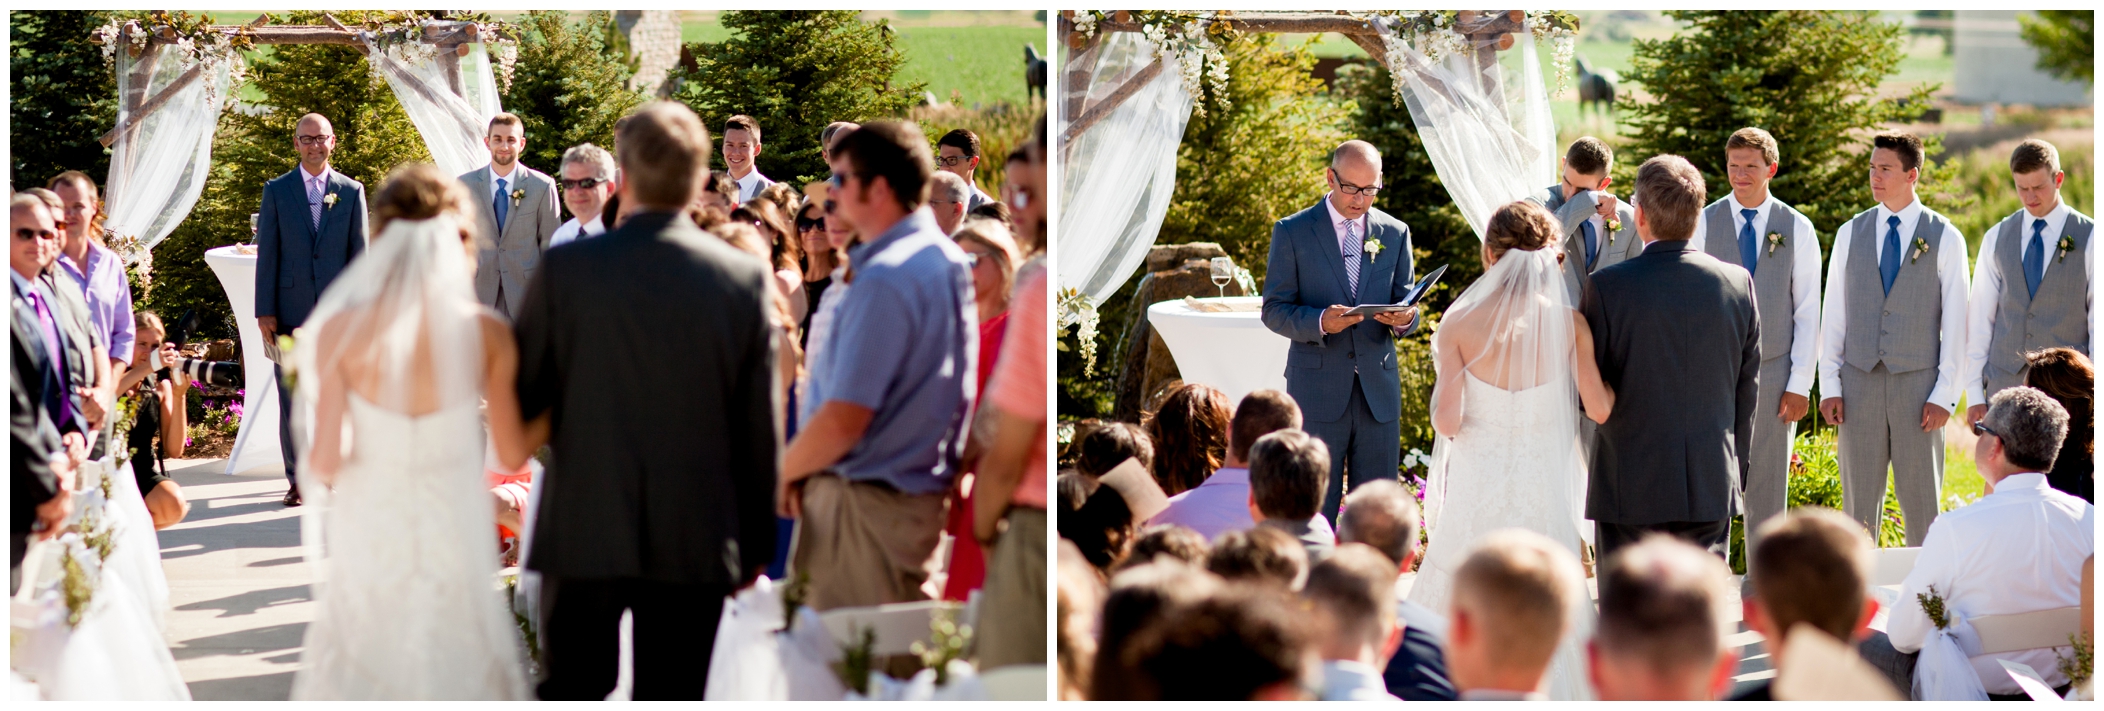 Windsong Estate wedding photos by Ft. Collins photographer Plum Pretty Photography